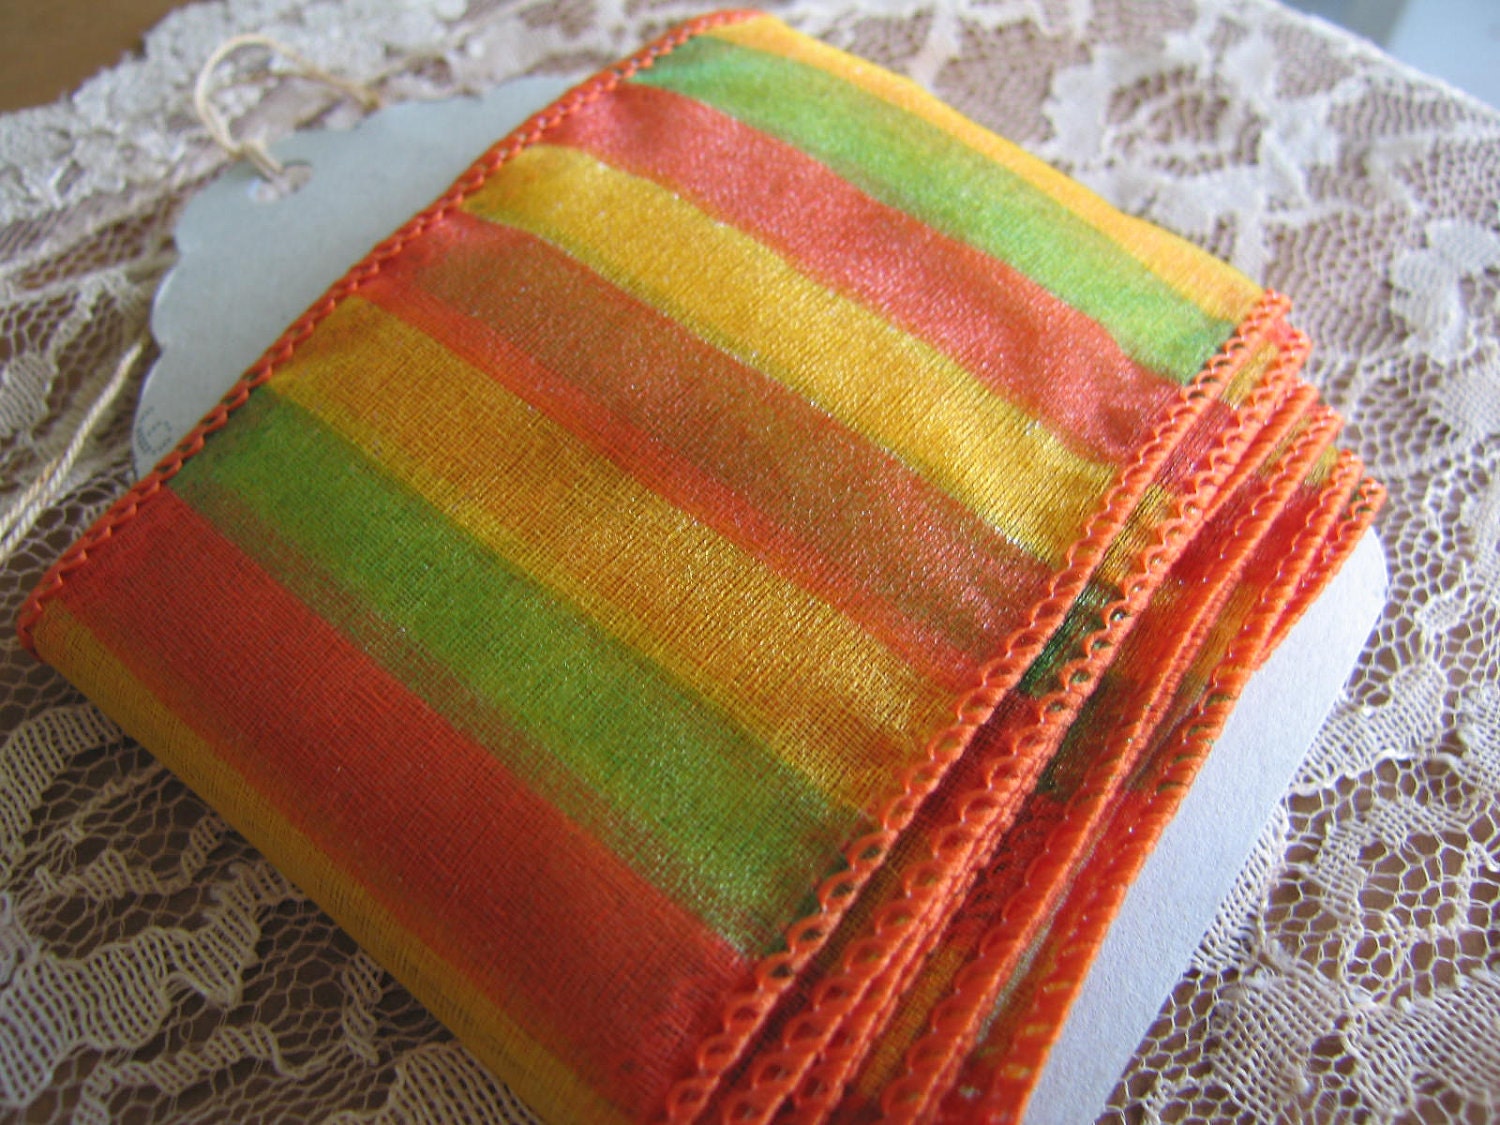 3 Yards of  Wired Edge Ribbon - Sheer Fall Colors - Crafting Supply